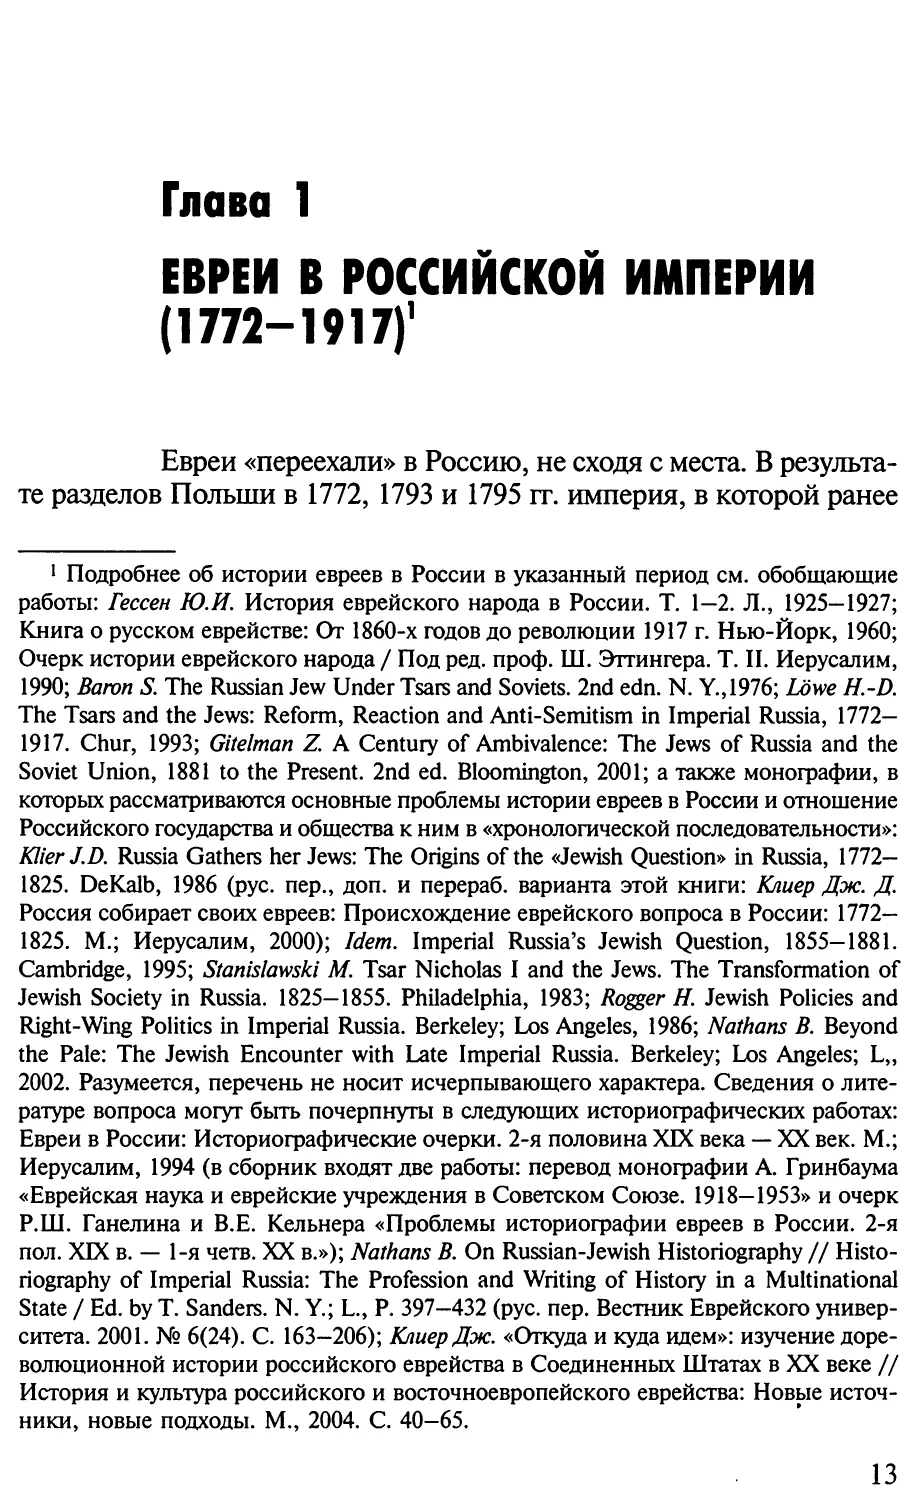 Chapter 1. The Jews in the Russian Empire, 1772-1917